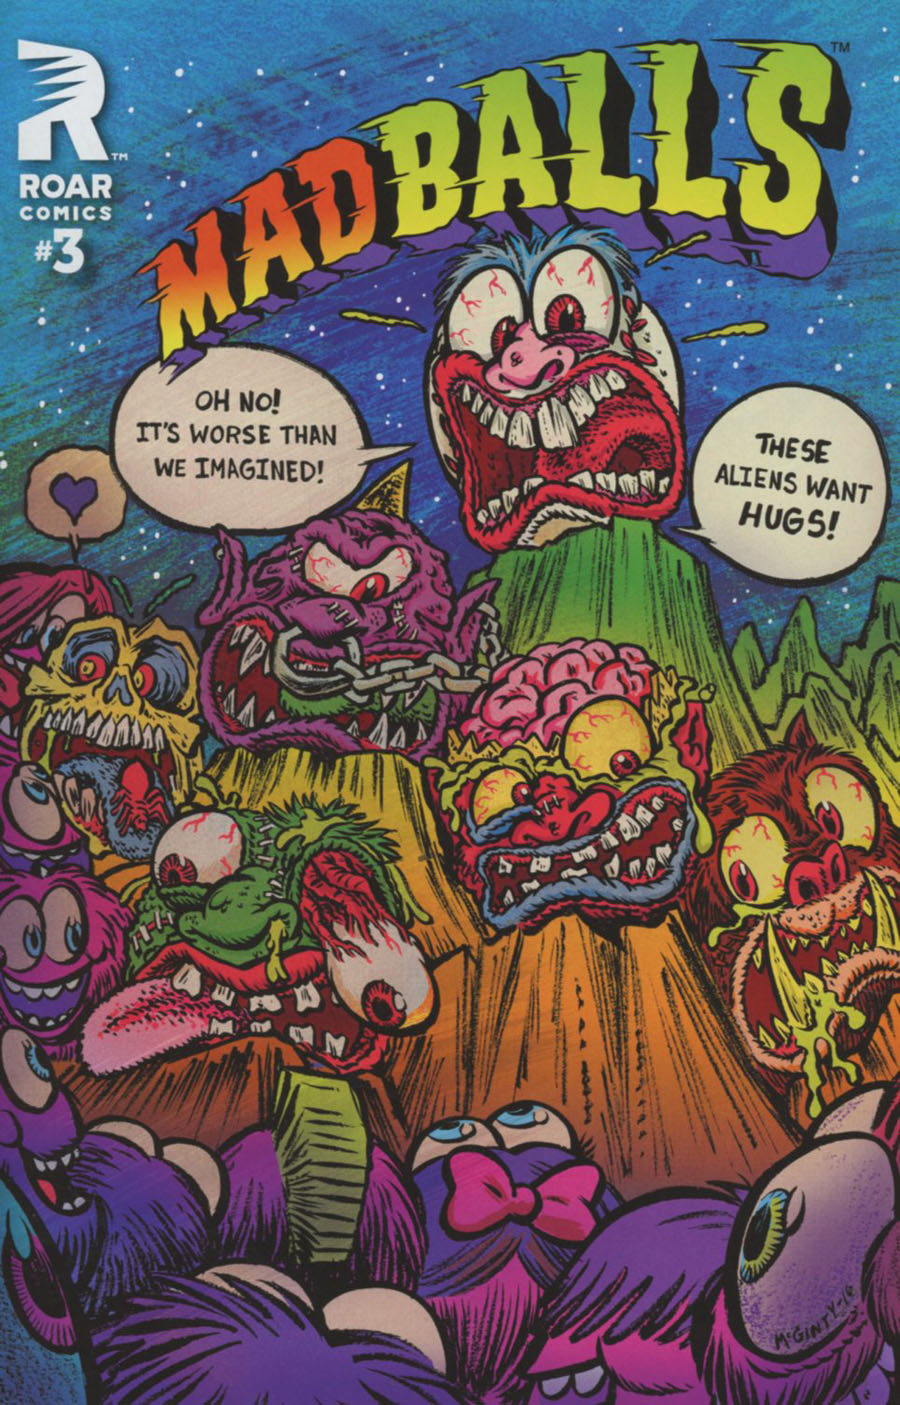 Mad Balls #3 Cover A Regular Brad McGinty Cover